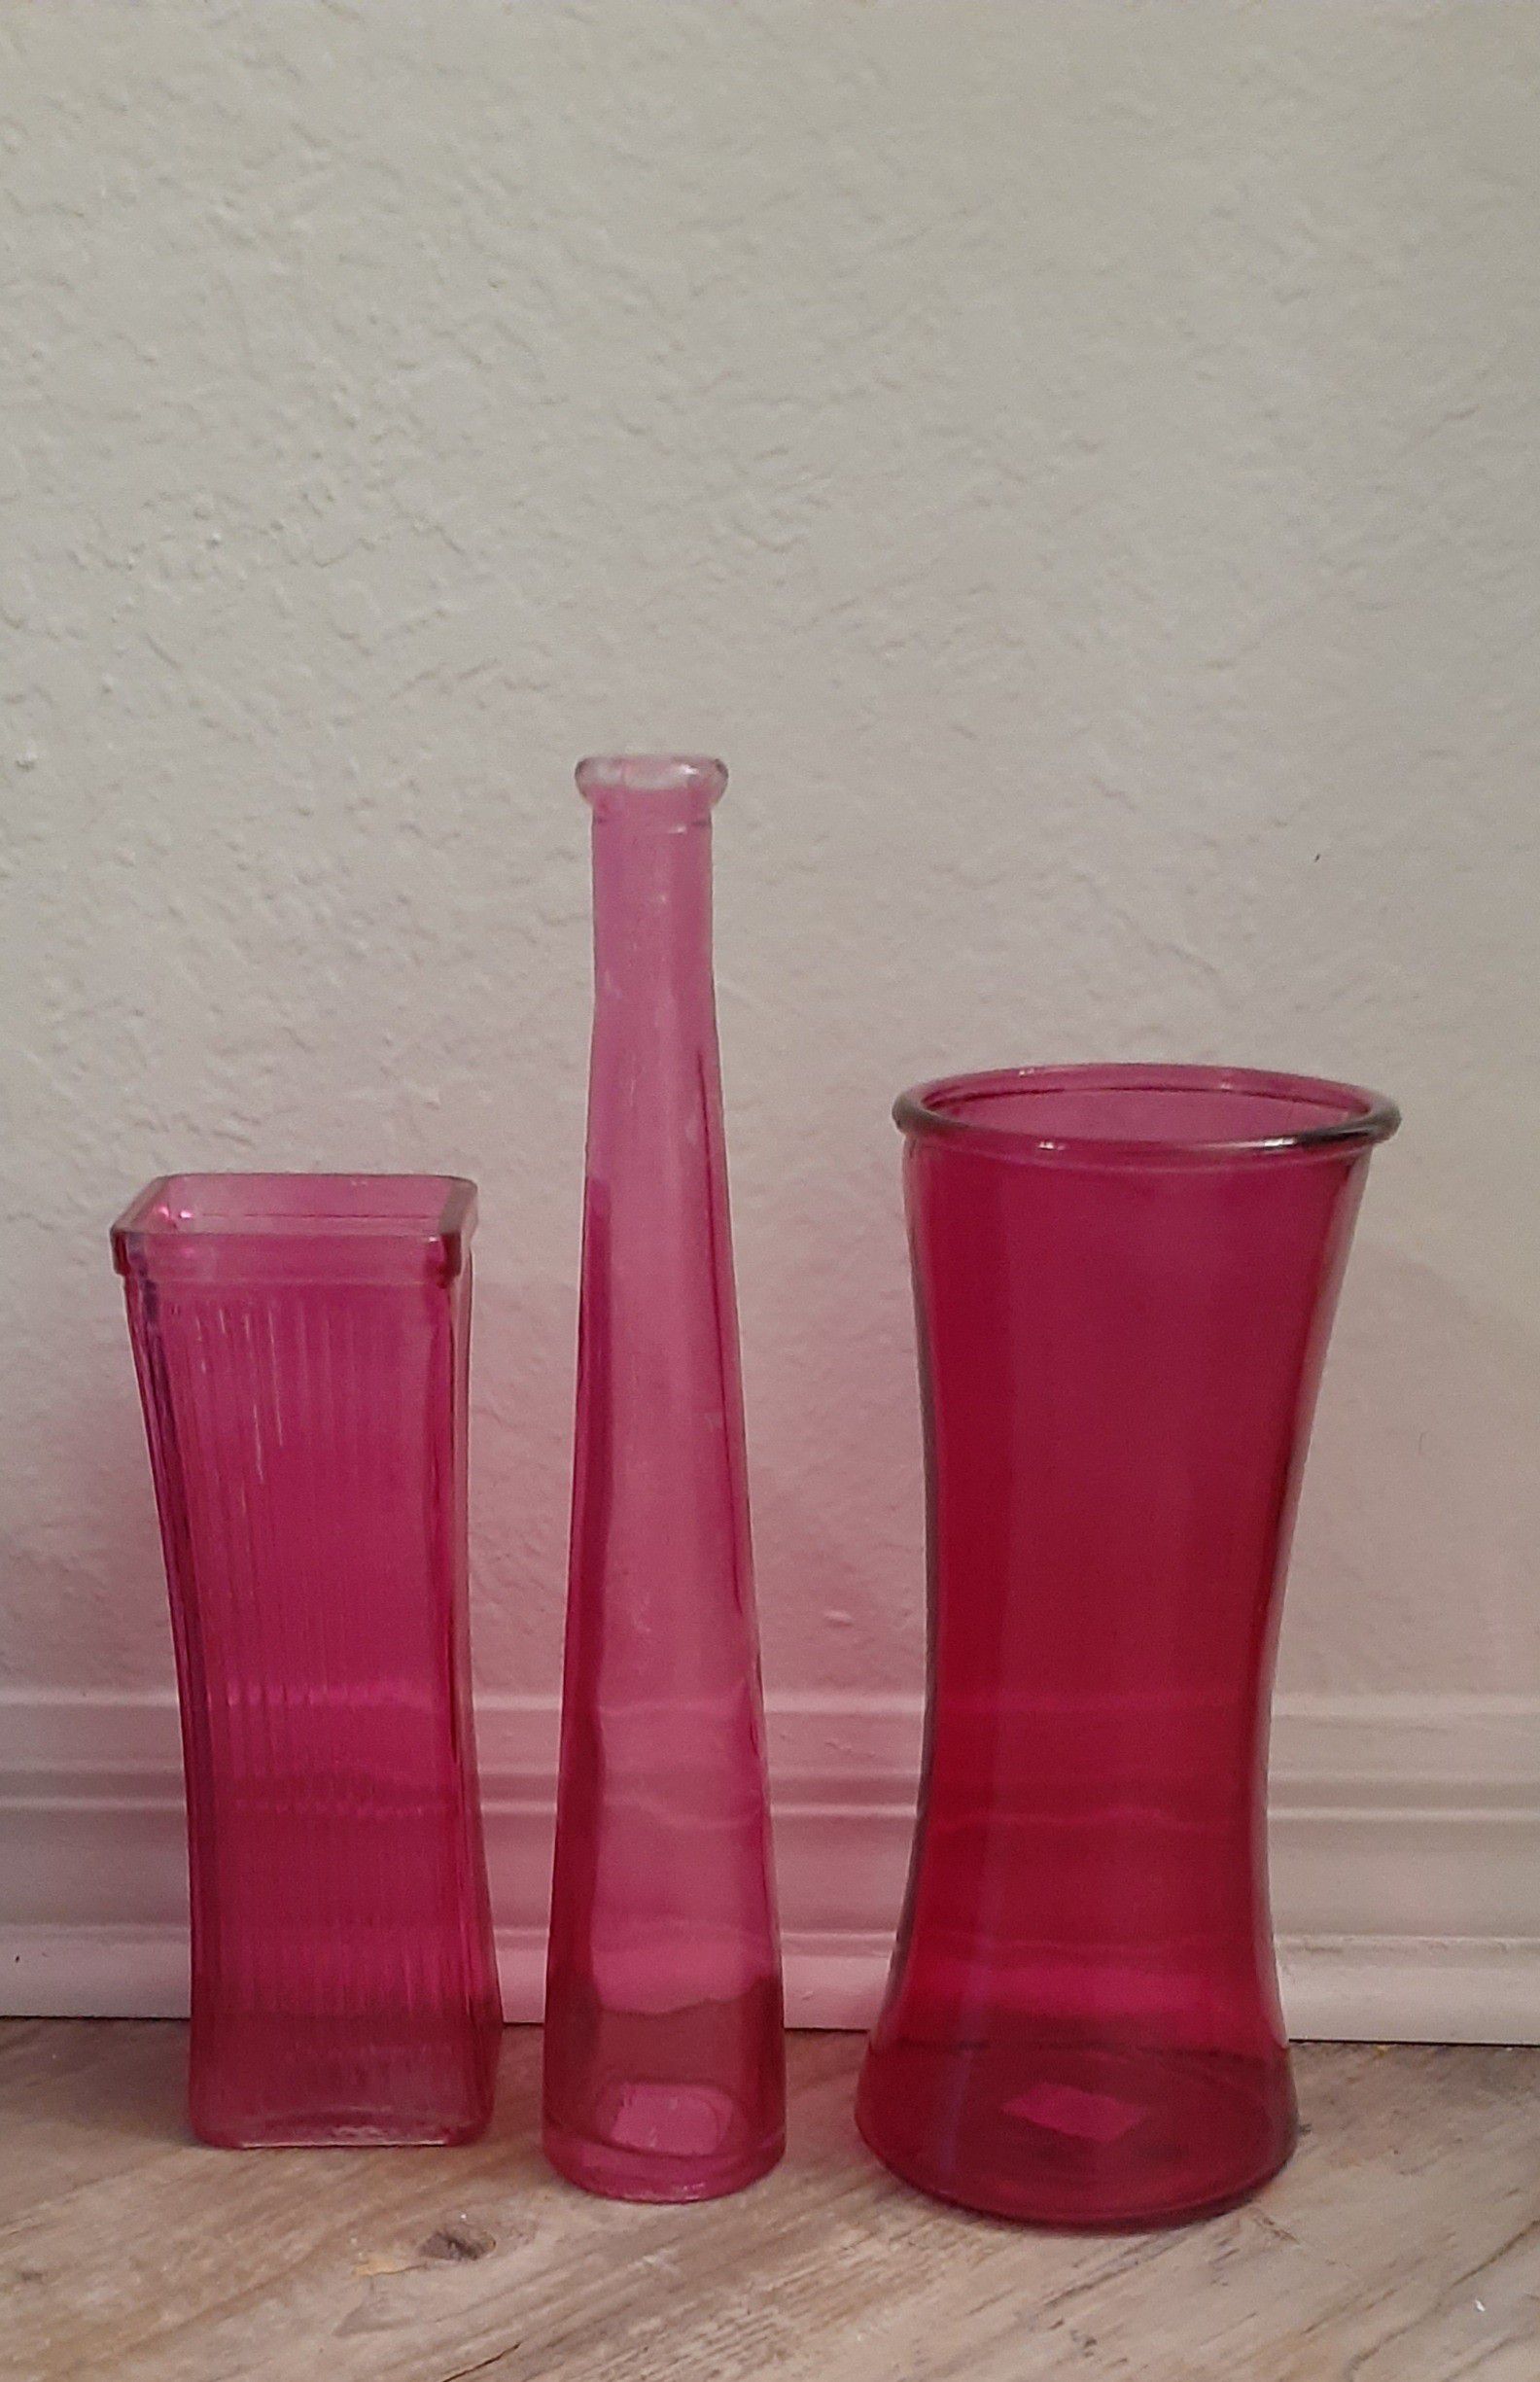 3 Small Vases for Sale